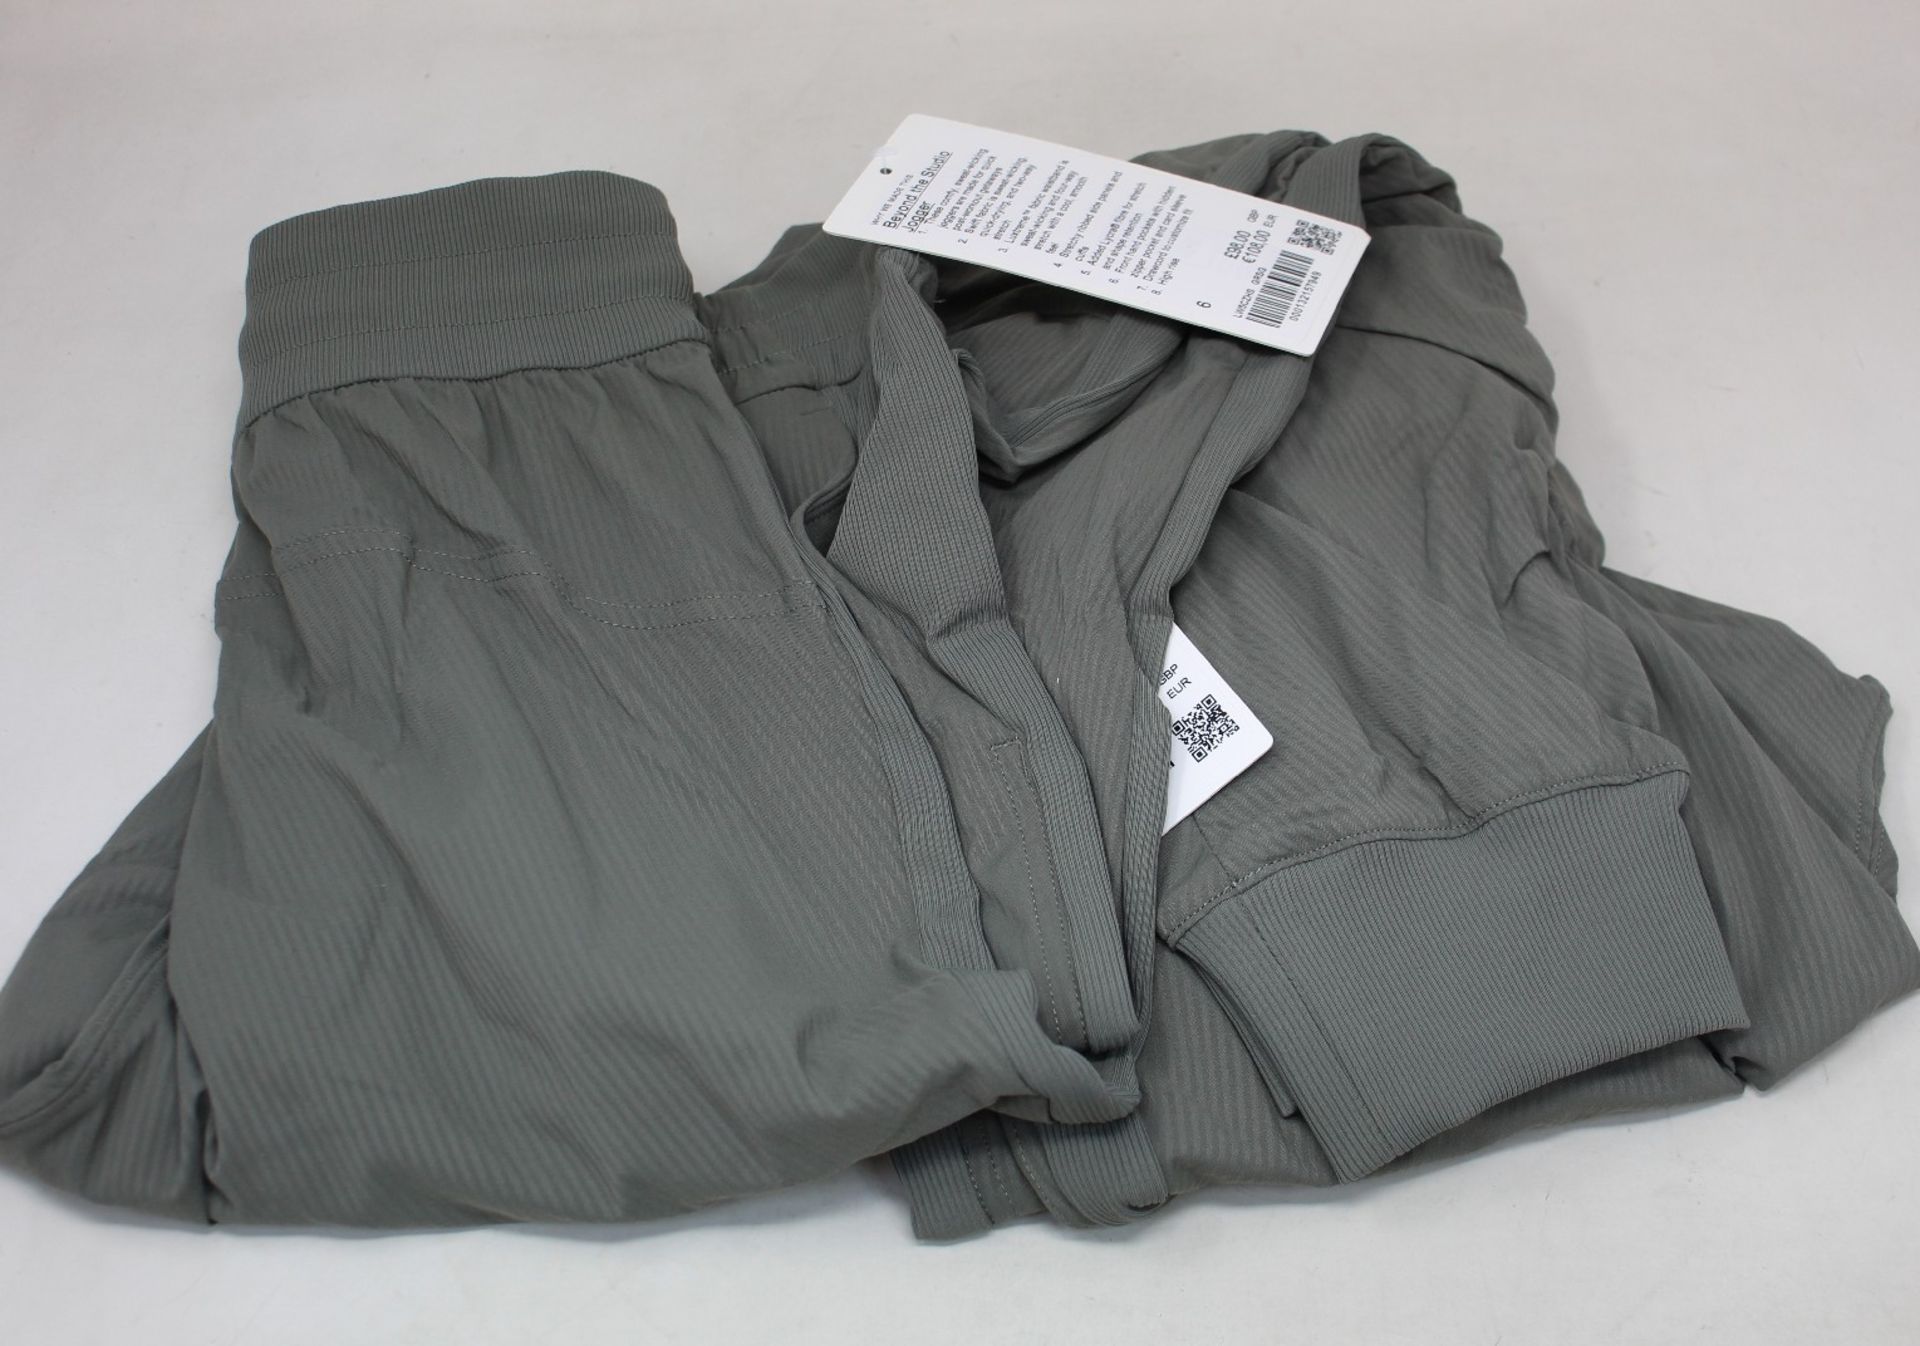 Two pairs of as new LuluLemon Beyond the Studio joggers (Sizes 0, 5 - RRP £98 each).